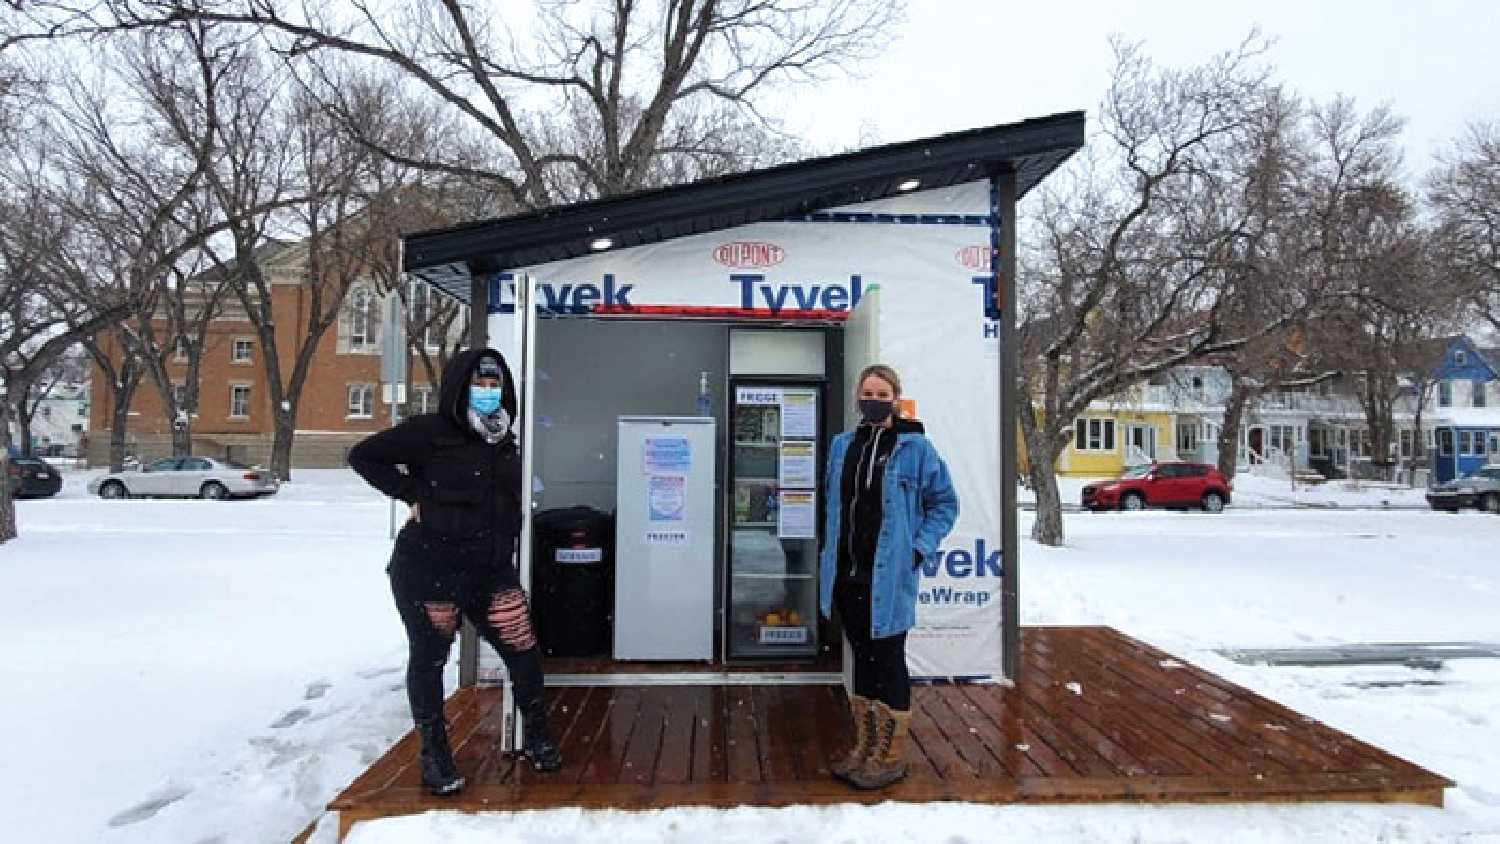 The Moosomin Food Share is planning a community fridge where people can freely leave or take food items, similar to this Community Fridge in Regina.